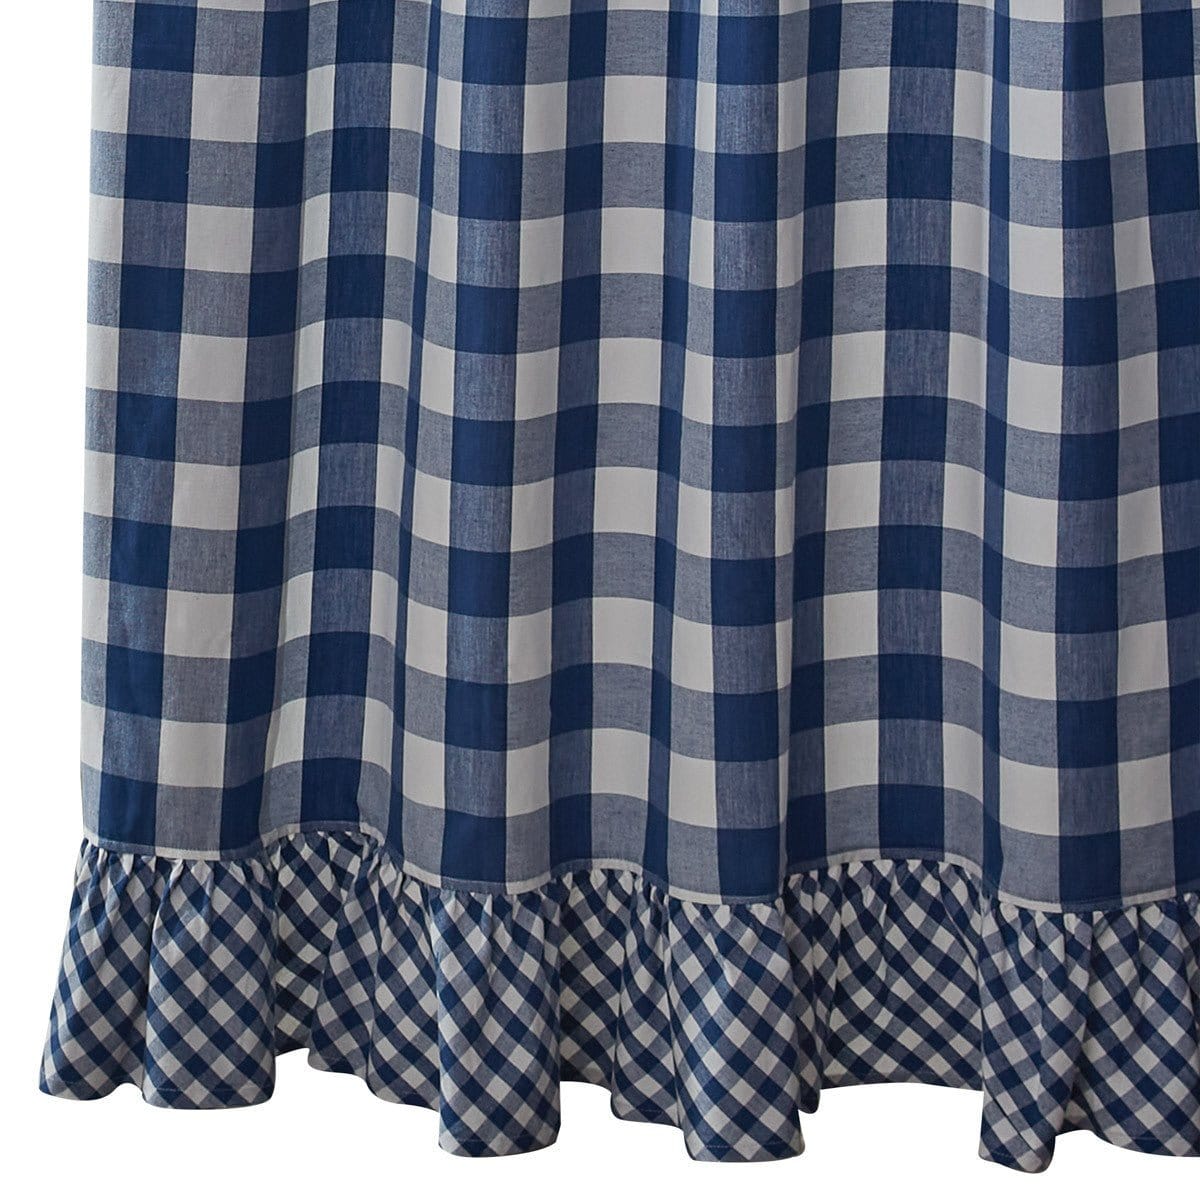 Wicklow Check in China Blue Ruffled Shower Curtain-Park Designs-The Village Merchant